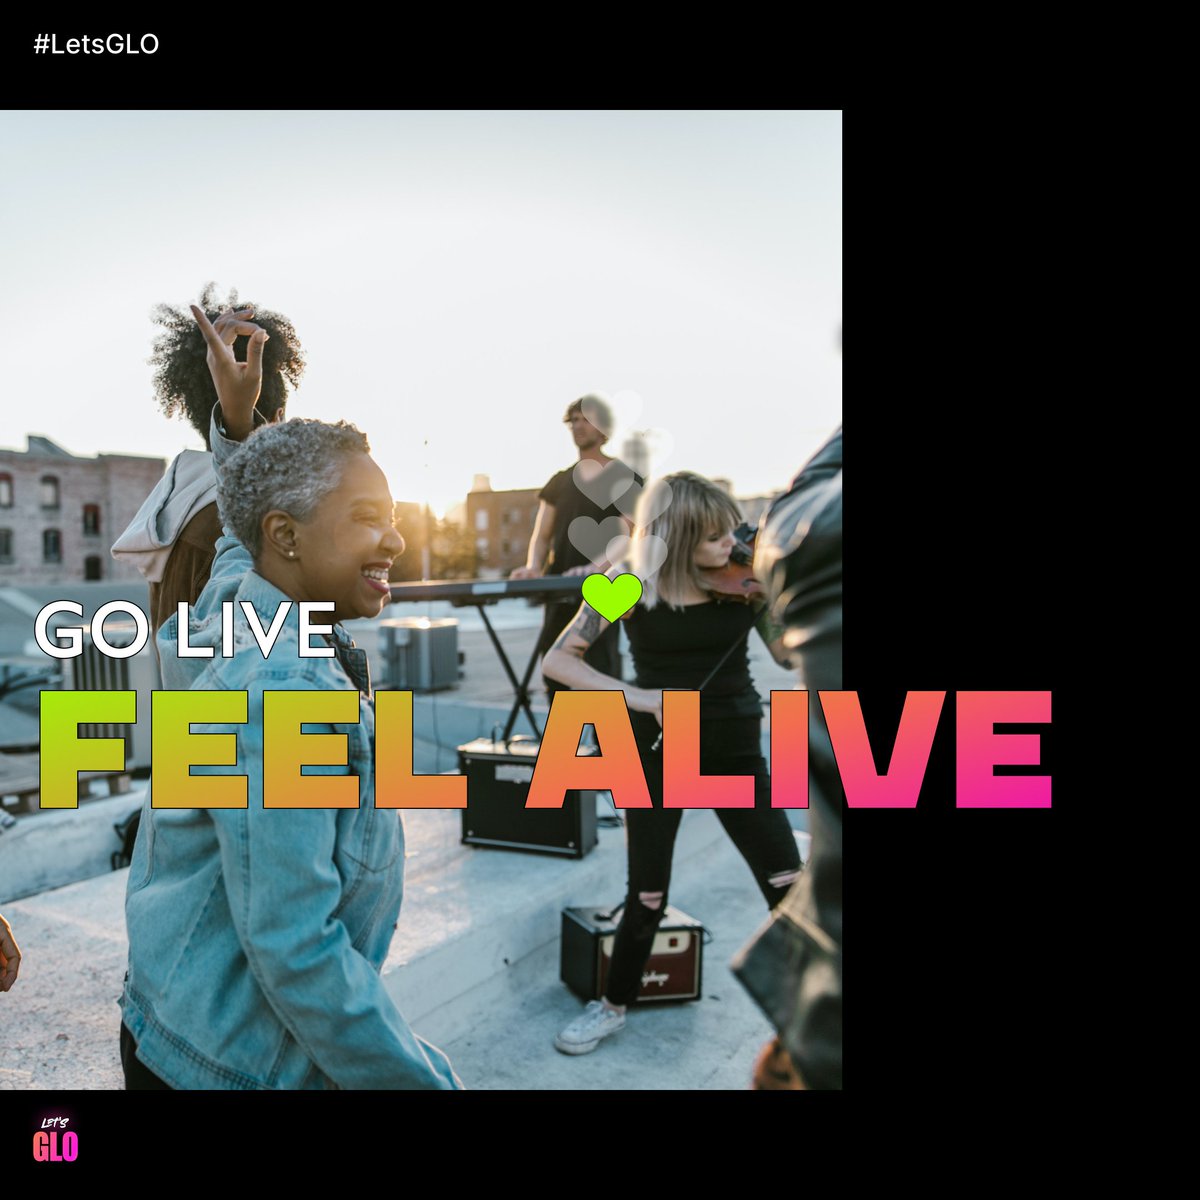 After yrs of quarantine...it's time to live your best life outdoors.  

Let’sGlo is where live art happens online.  

DM to join our invite-only community today.     
#LetsGLO #interactivelivestream #indieartists #livemusic #liveart #outdoorart #outdoormusic #coachella